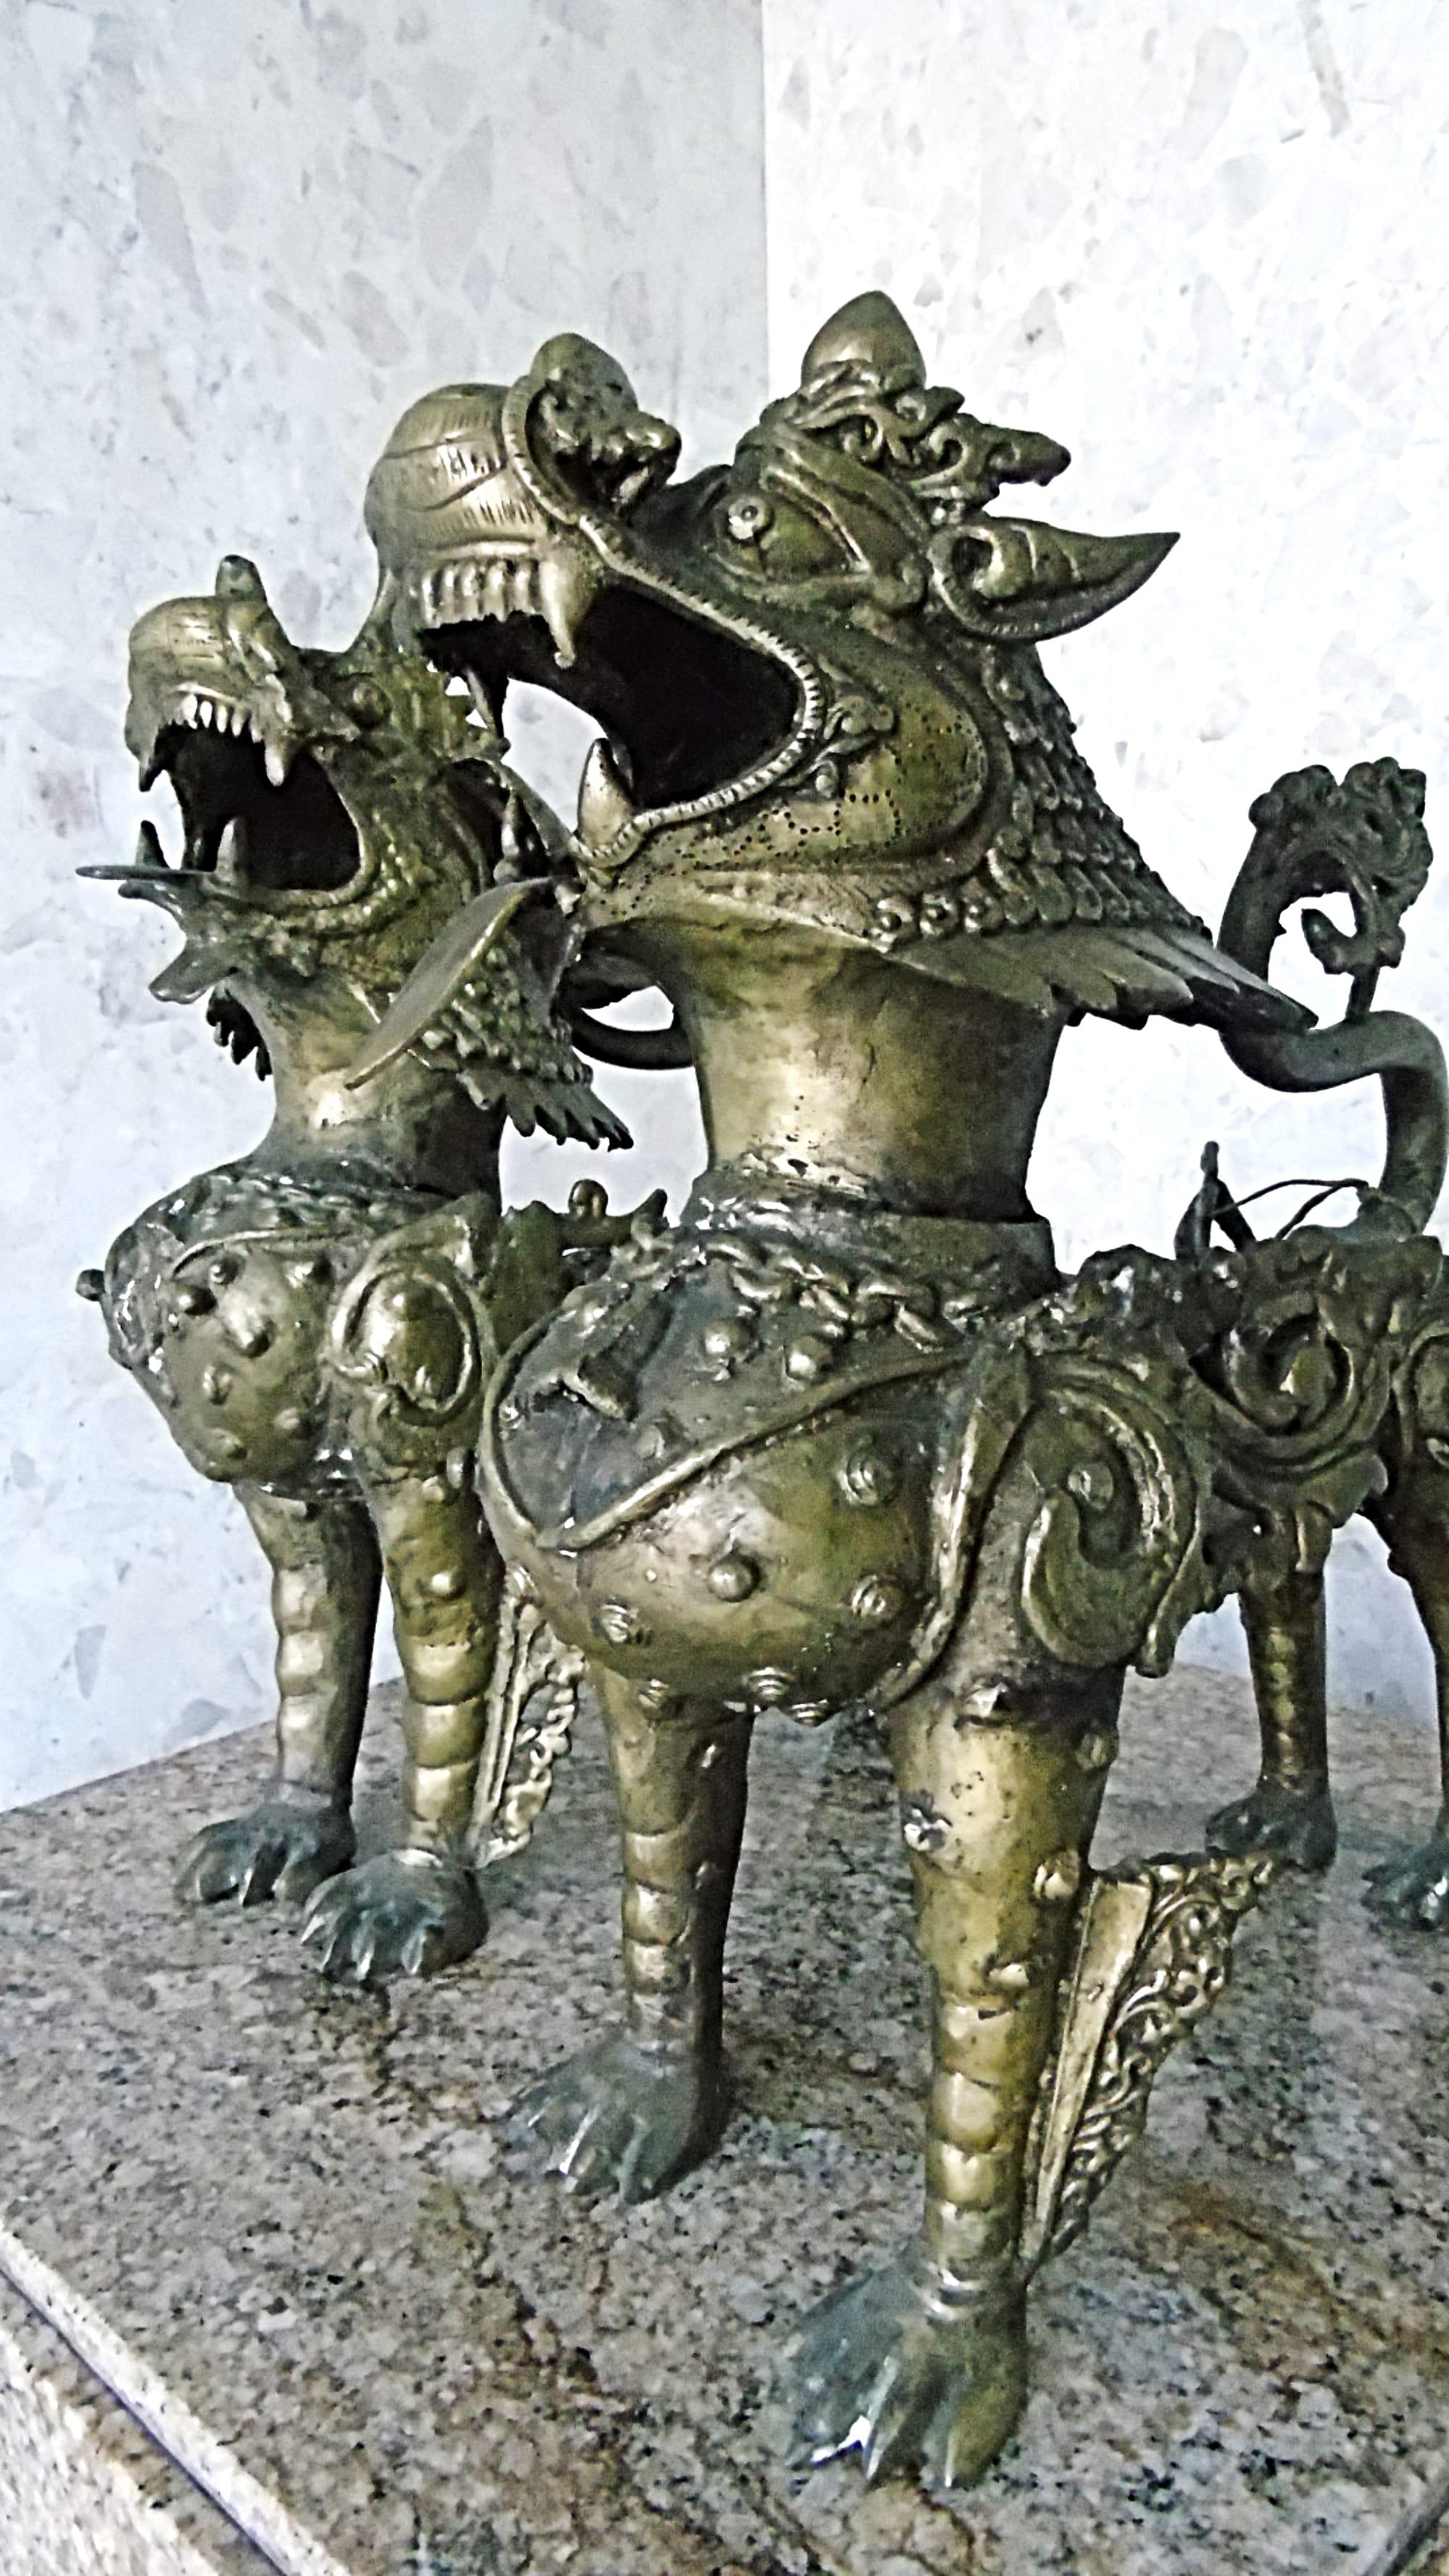 Pair of antique bronze foo dogs made of bronze with fine details and decorations.

Beautiful patina, good condition.

1900s, China

Dimensions:
Dimensions 16